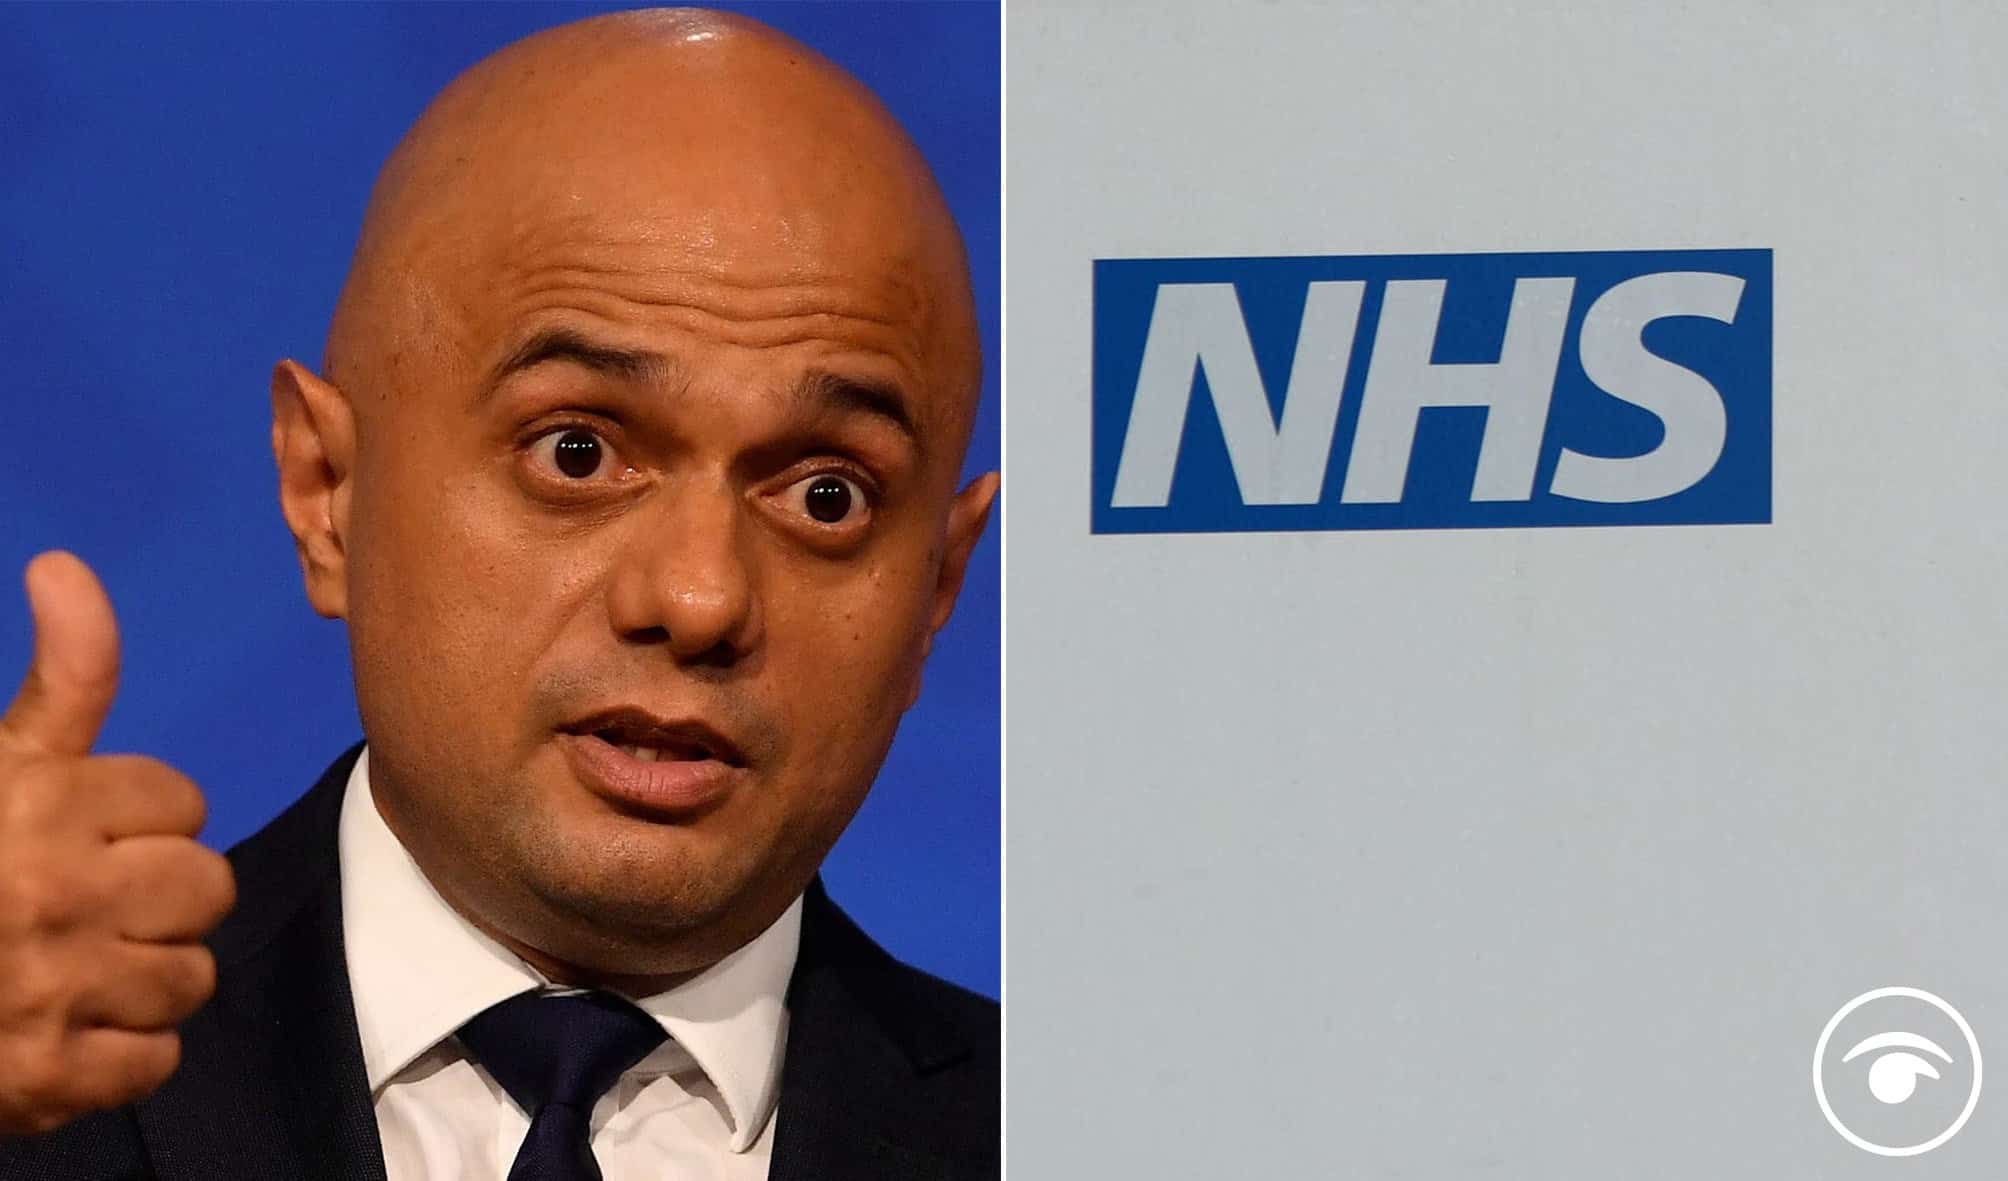 Fury as video of NHS waiting time goes viral as Javid says service is like ‘Blockbuster video’